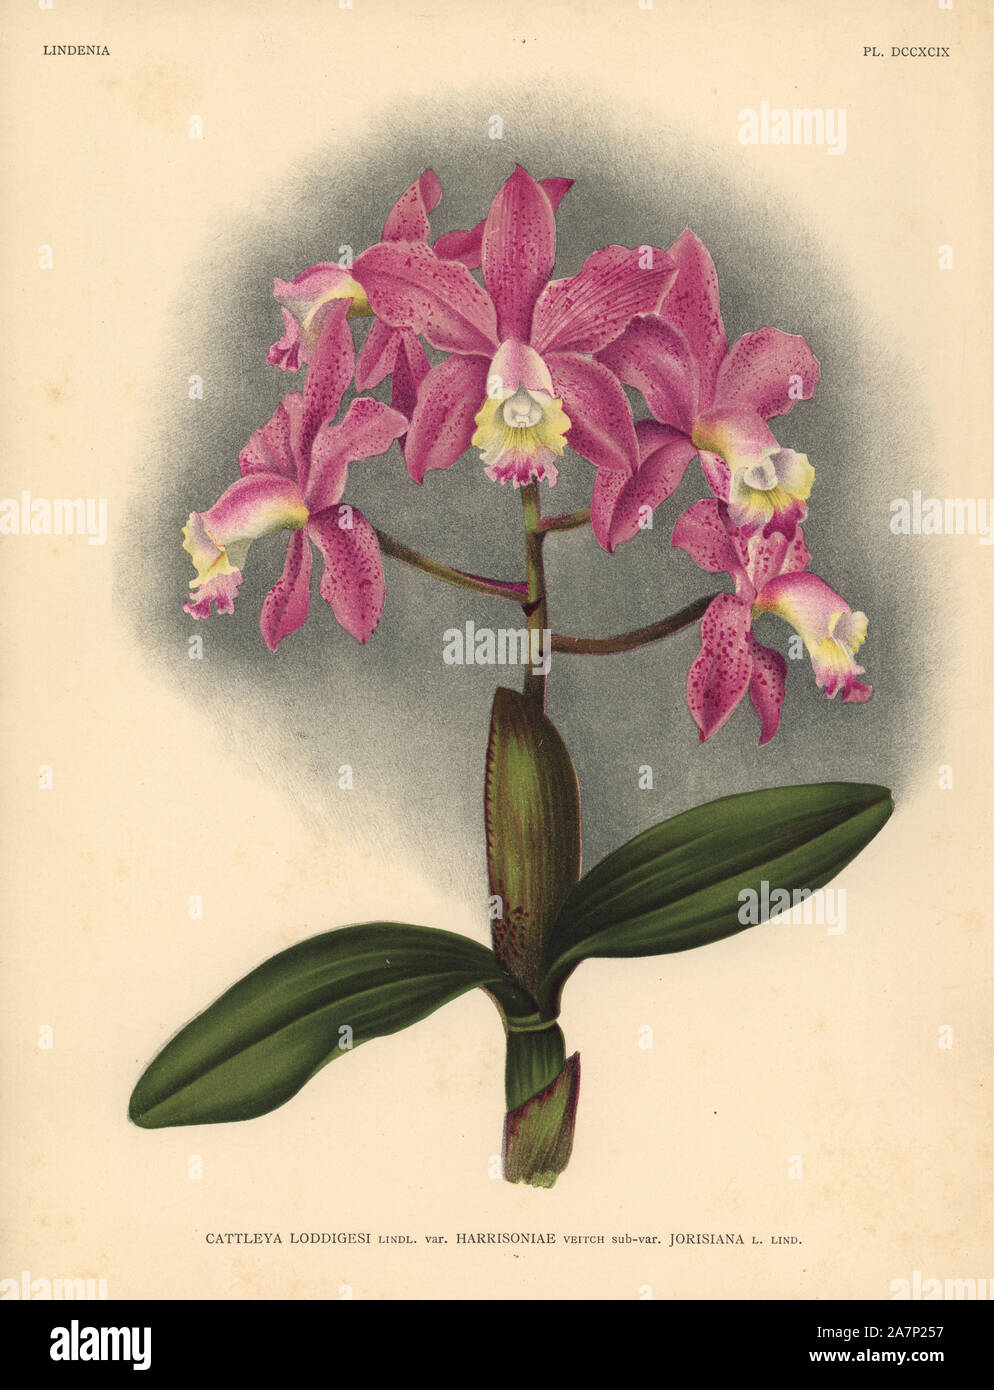 Harrisoniae variety of Cattleya loddigesi, Lindl., orchid. Botanical illustration in  chromolithograph from Lucien Linden's 'Lindenia, Iconographie des Orchidees,' Brussels, 1903. Stock Photo